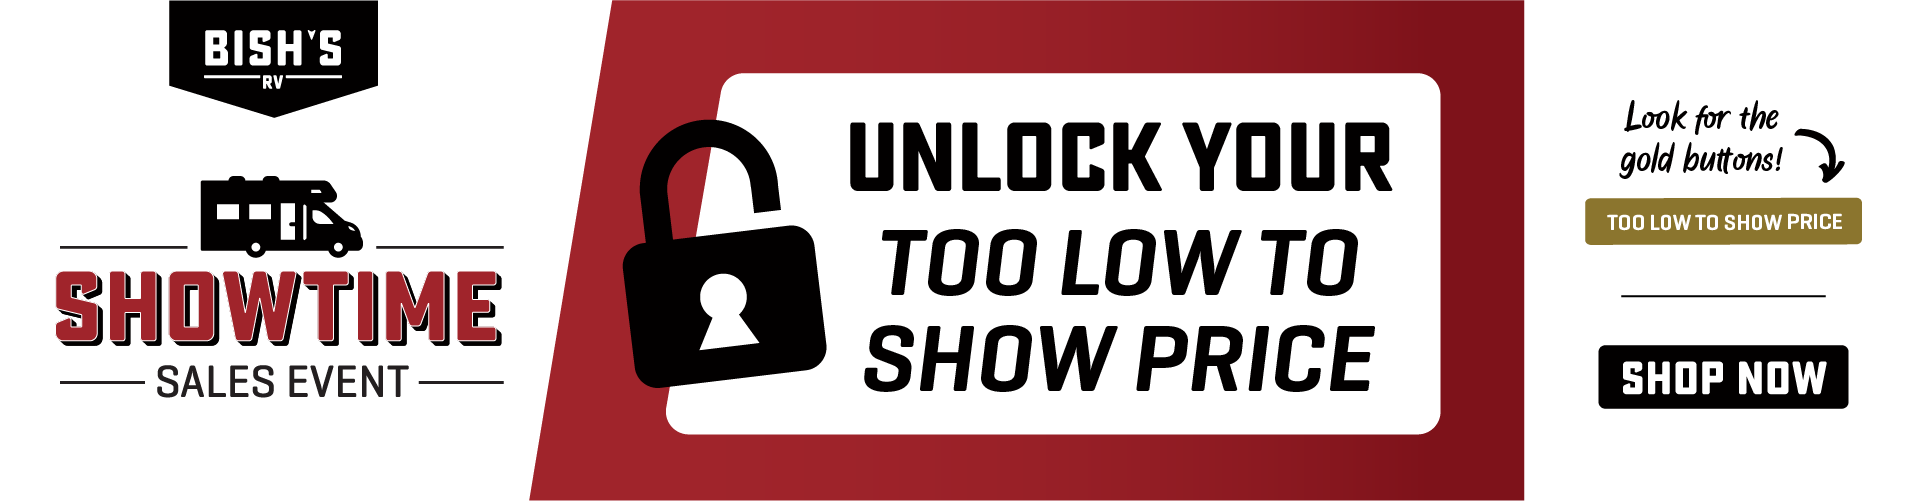 Unlock Your Too Low To Show Price